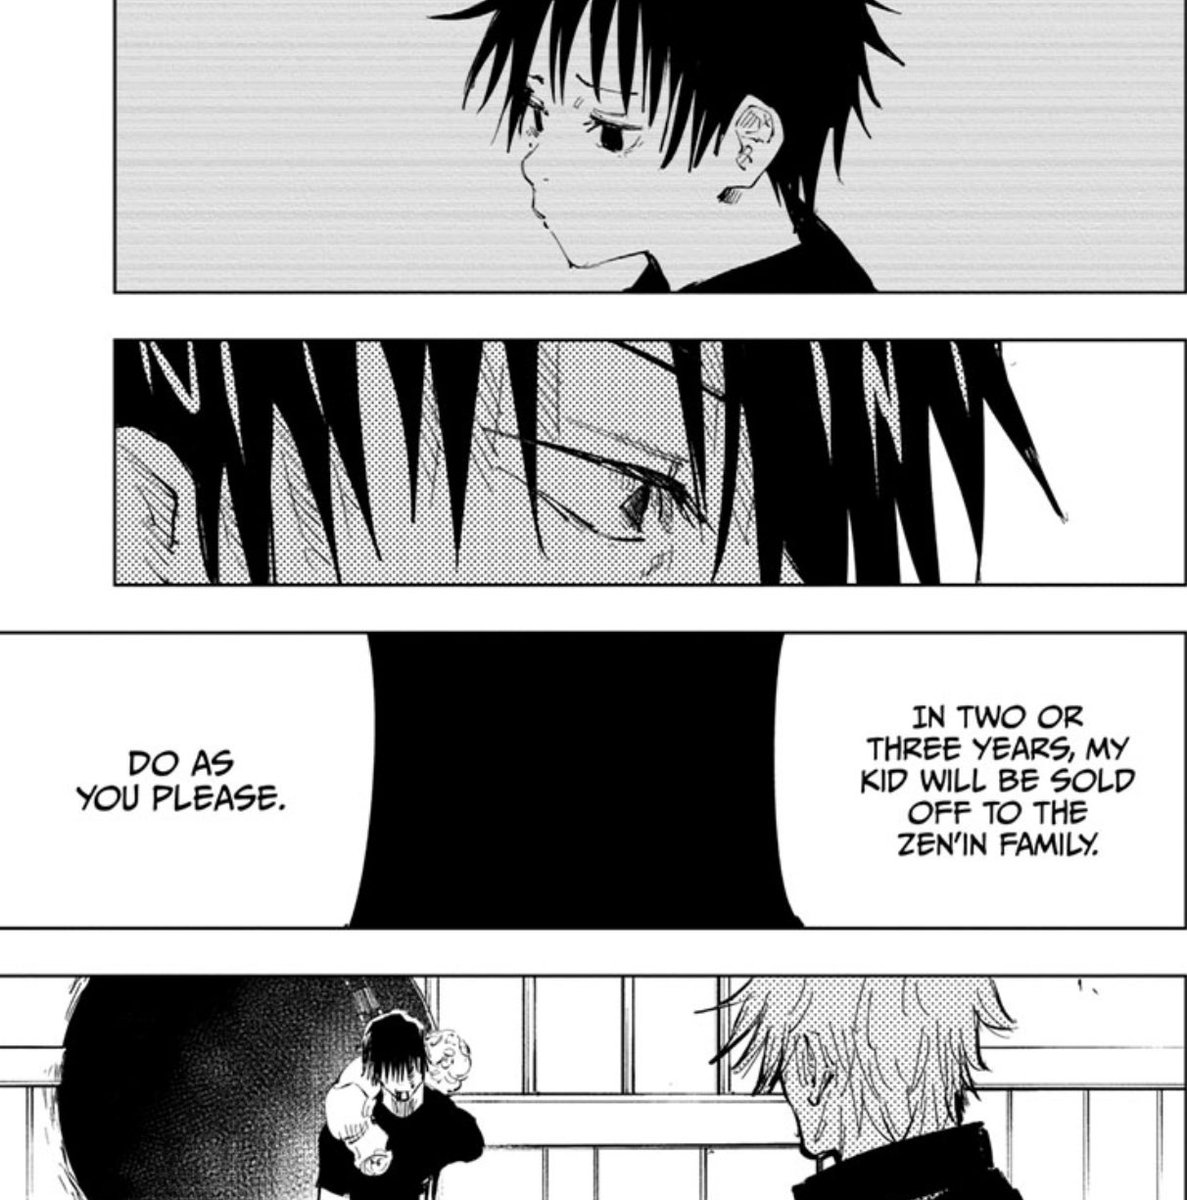 But then in his FINAL moments, Toji thinks of Megumi. This made Toji swallow all his pride & tells the person (Gojo) that represents what he detests the most (Jujutsu world) about his son’s situation since he knew megumi wouldnt become clan head if gojo wasnt dead.